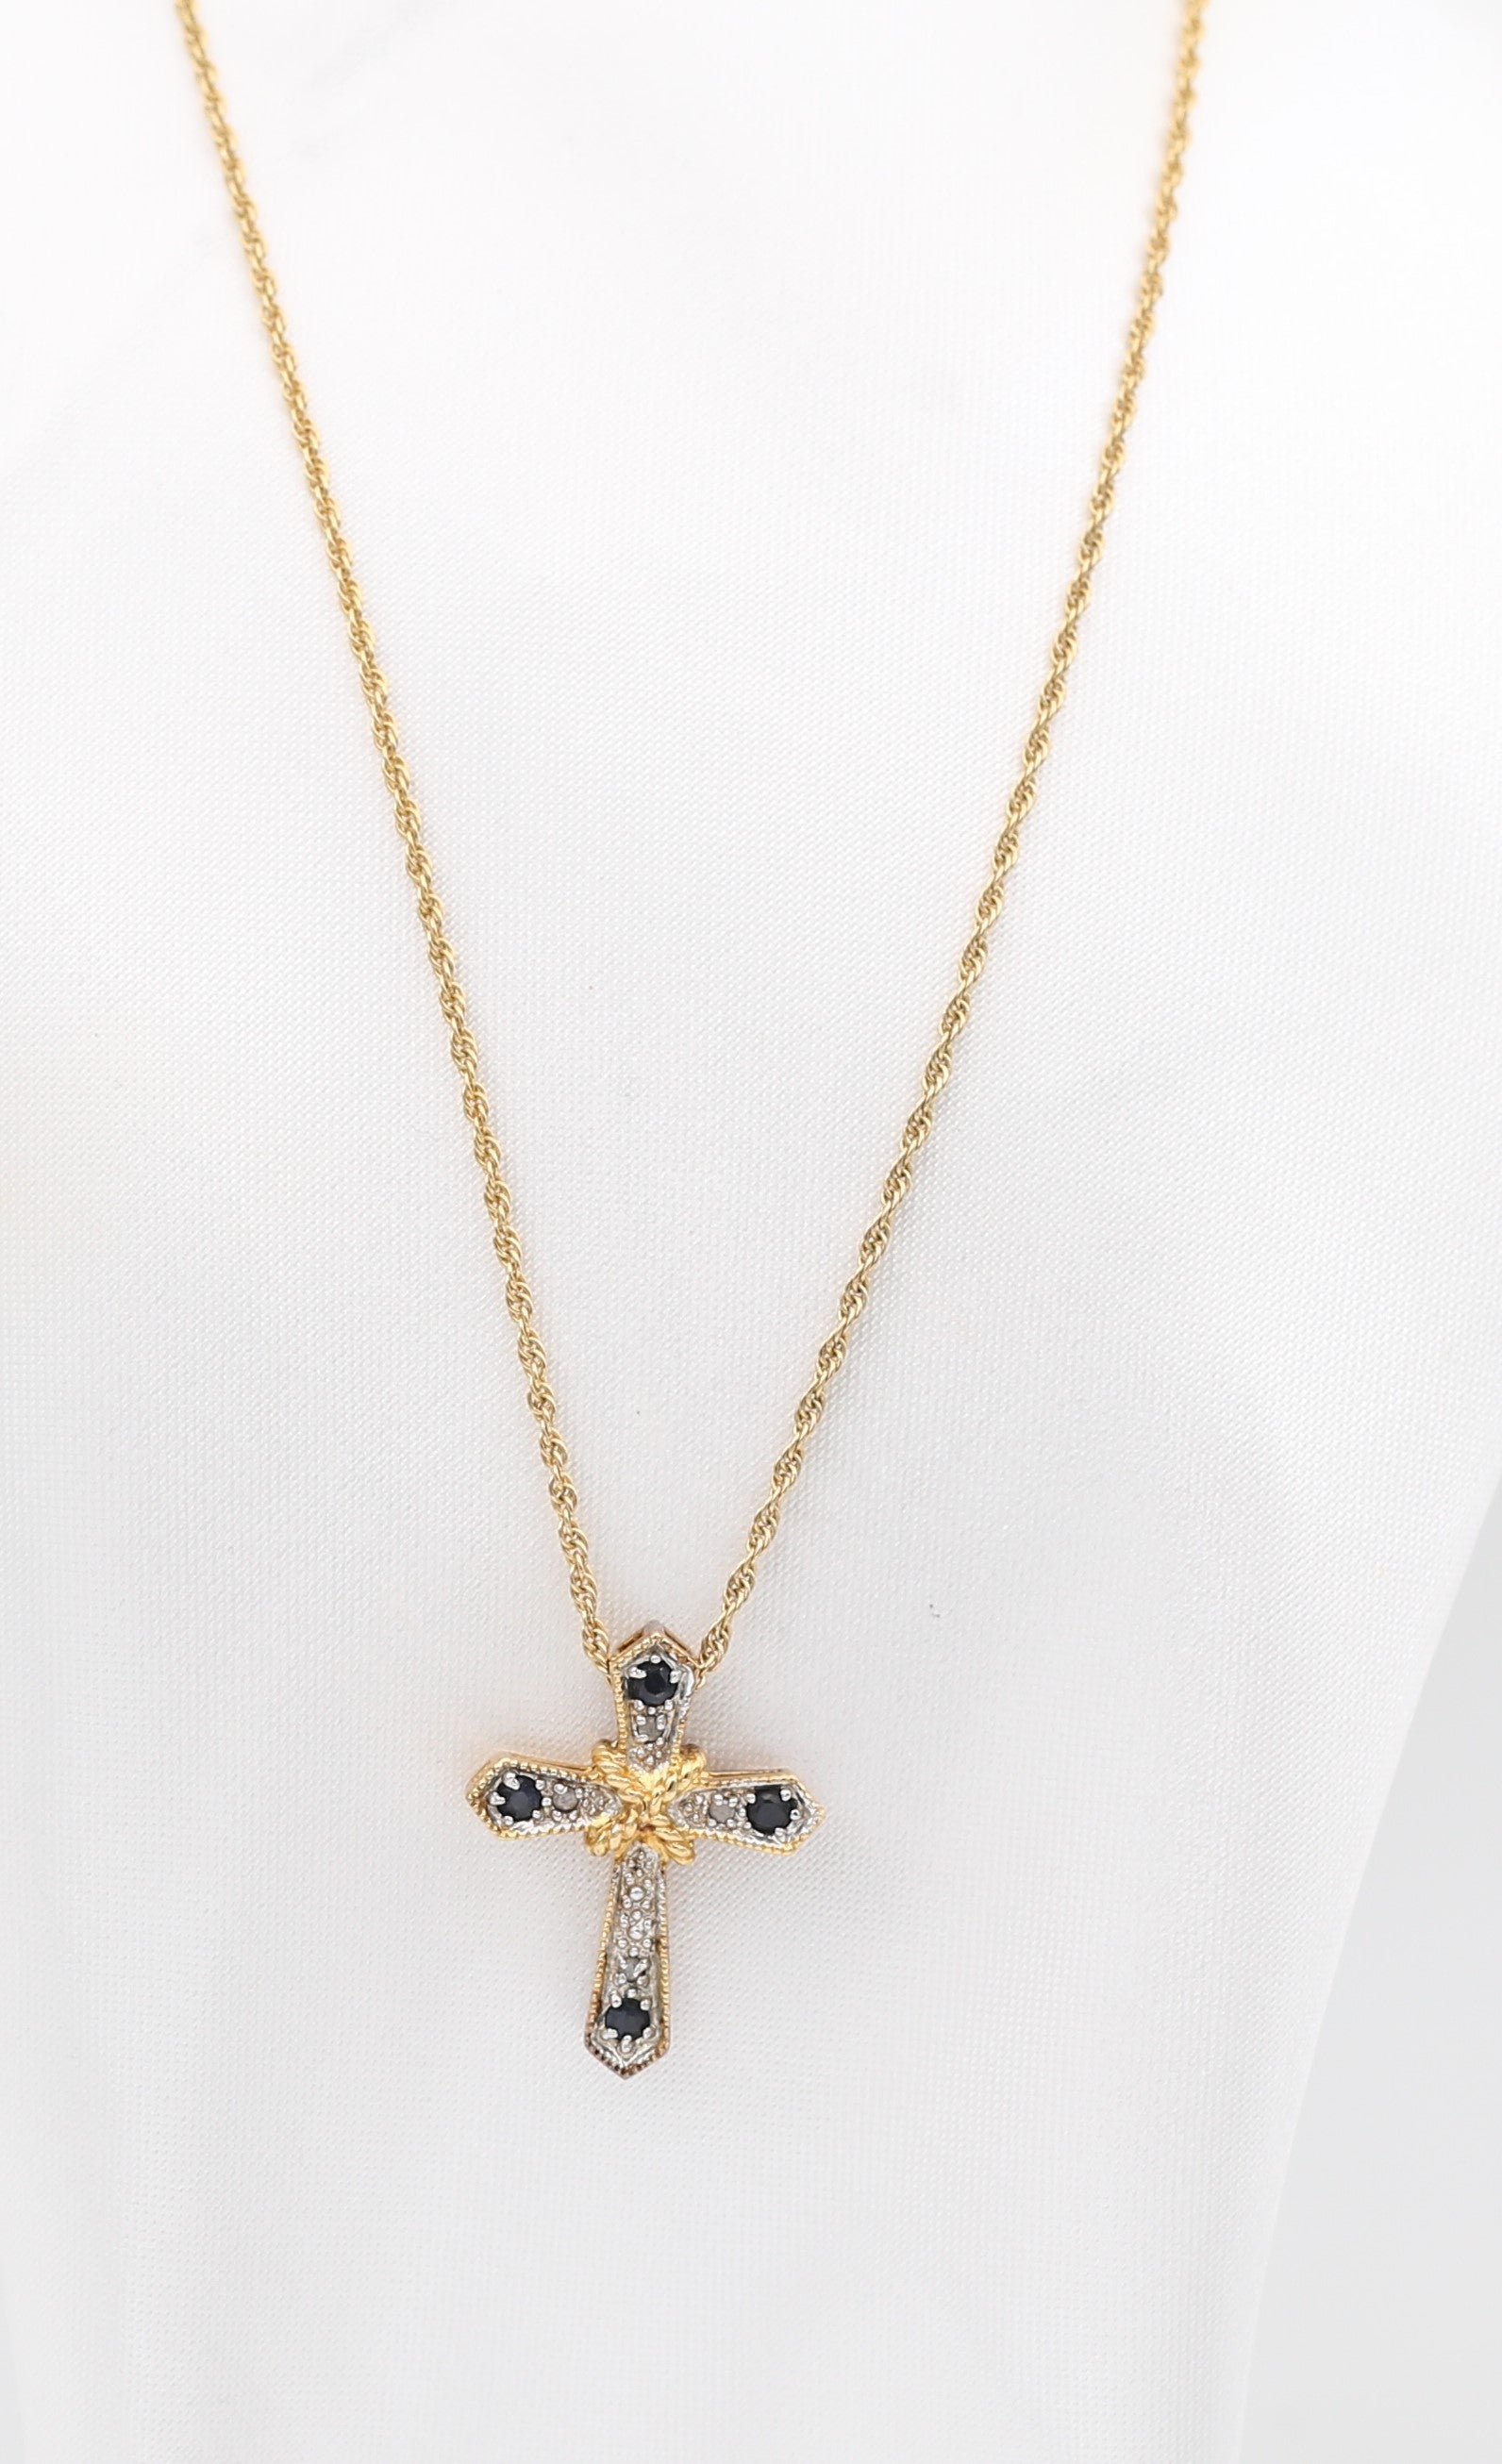 Gold Toned Cross Necklace